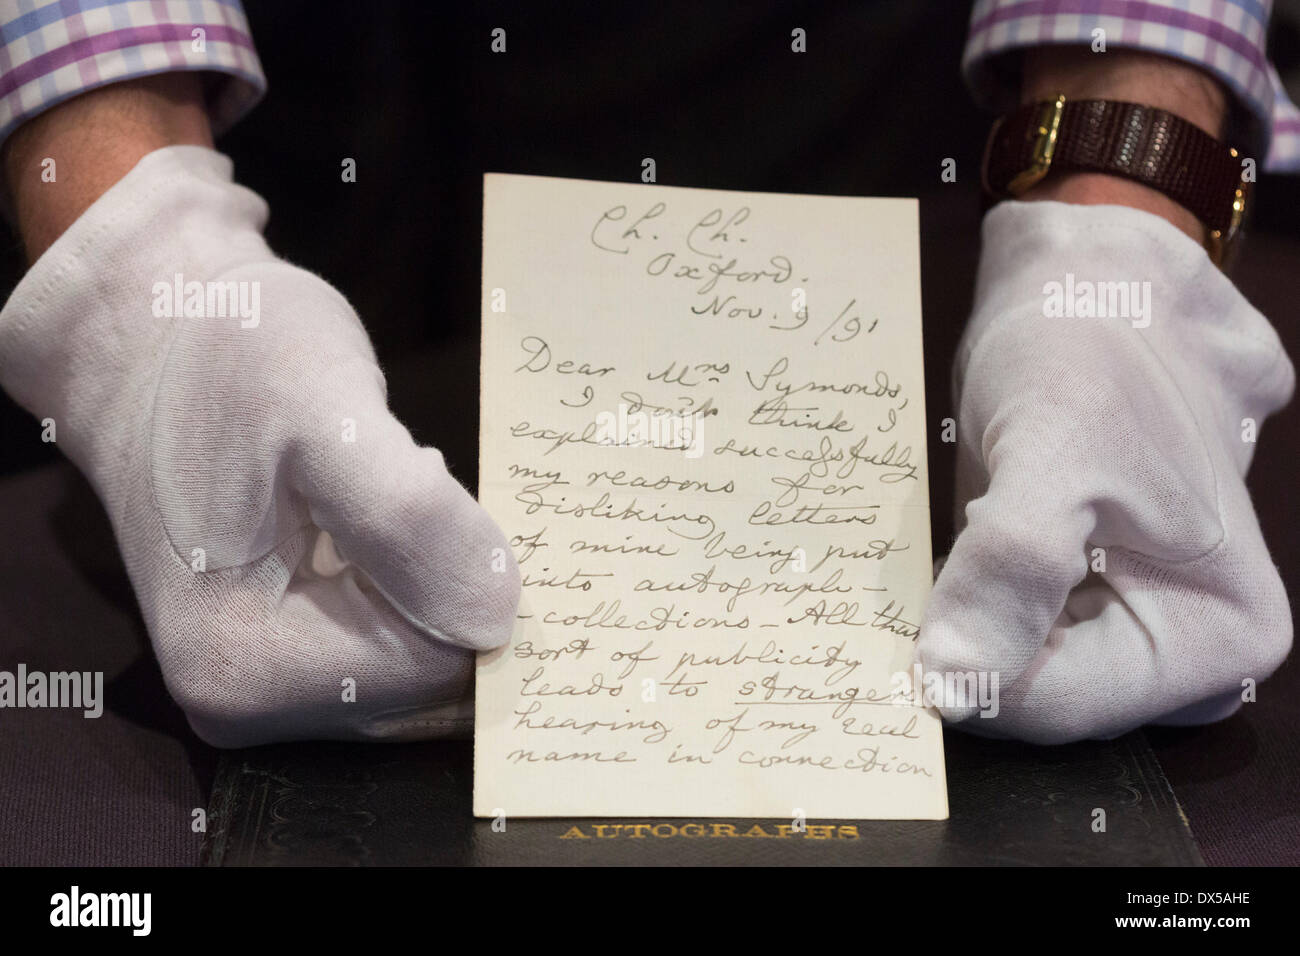 London, UK, 18 March 2014. The letter from Alice in Wonderland author Lewis Carroll (under his real name Charles Dodgson) to a friend complaining about the drawbacks of fame goes under the hammer and is expected to fetch £3,000-£4,000. In the letter, Carroll says he hated publicity so intensely that 'sometimes I almost wish I had never written any books at all'. The Bonhams' Books, Maps, Manuscripts and Historical Photographs auction takes place on 19 March 2014. Credit:  Nick Savage/Alamy Live News Stock Photo